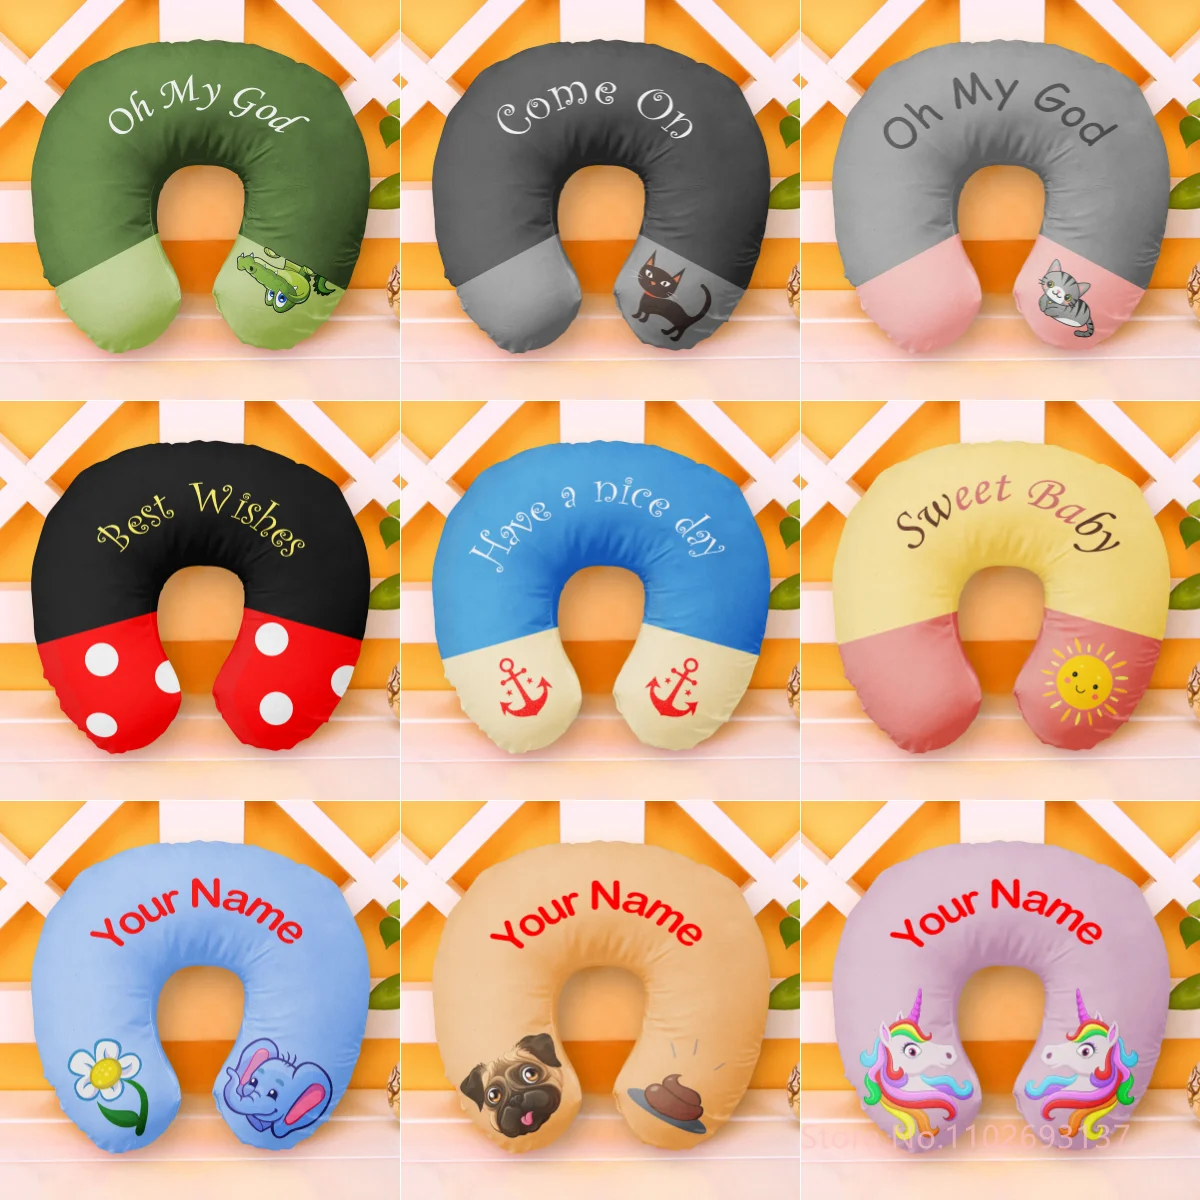 Customize Your Name Logo Modern U Shaped Pillow Cushion Neck Pillow Car Travel Inflatable Pillow Travel Accessories For Adult